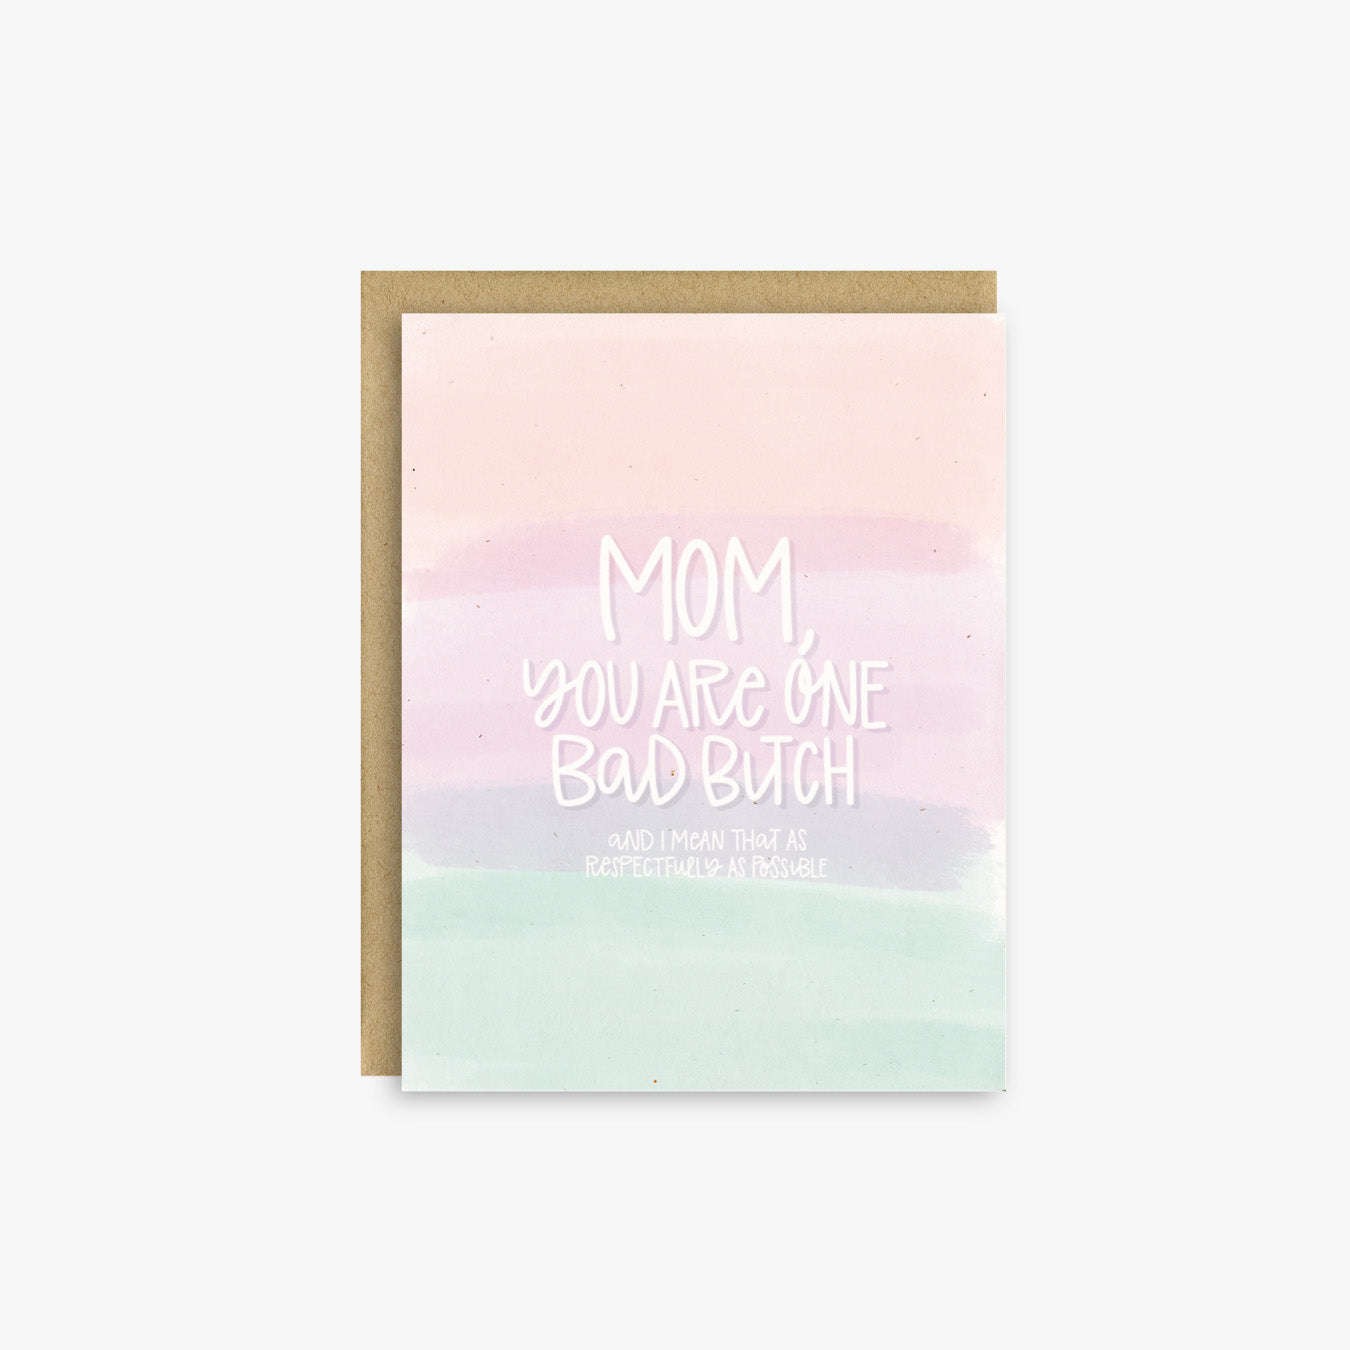 Bad Bitch Mom Card, Card for Moms